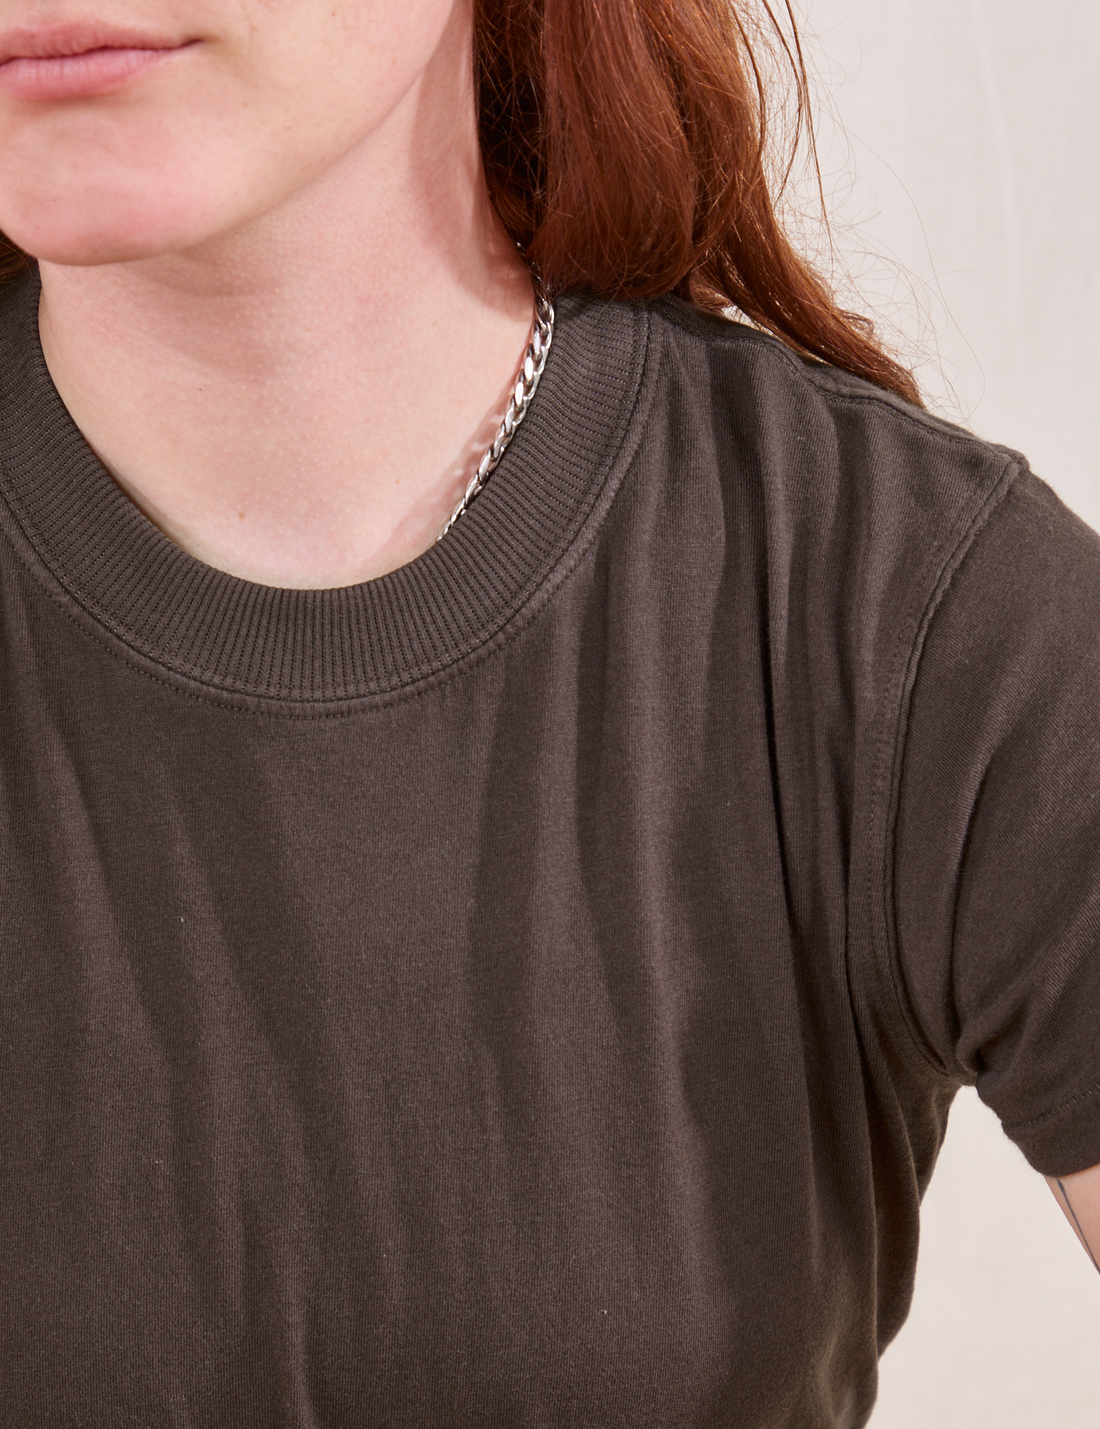 The Organic Vintage Tee in Espresso Brown close up on Alex